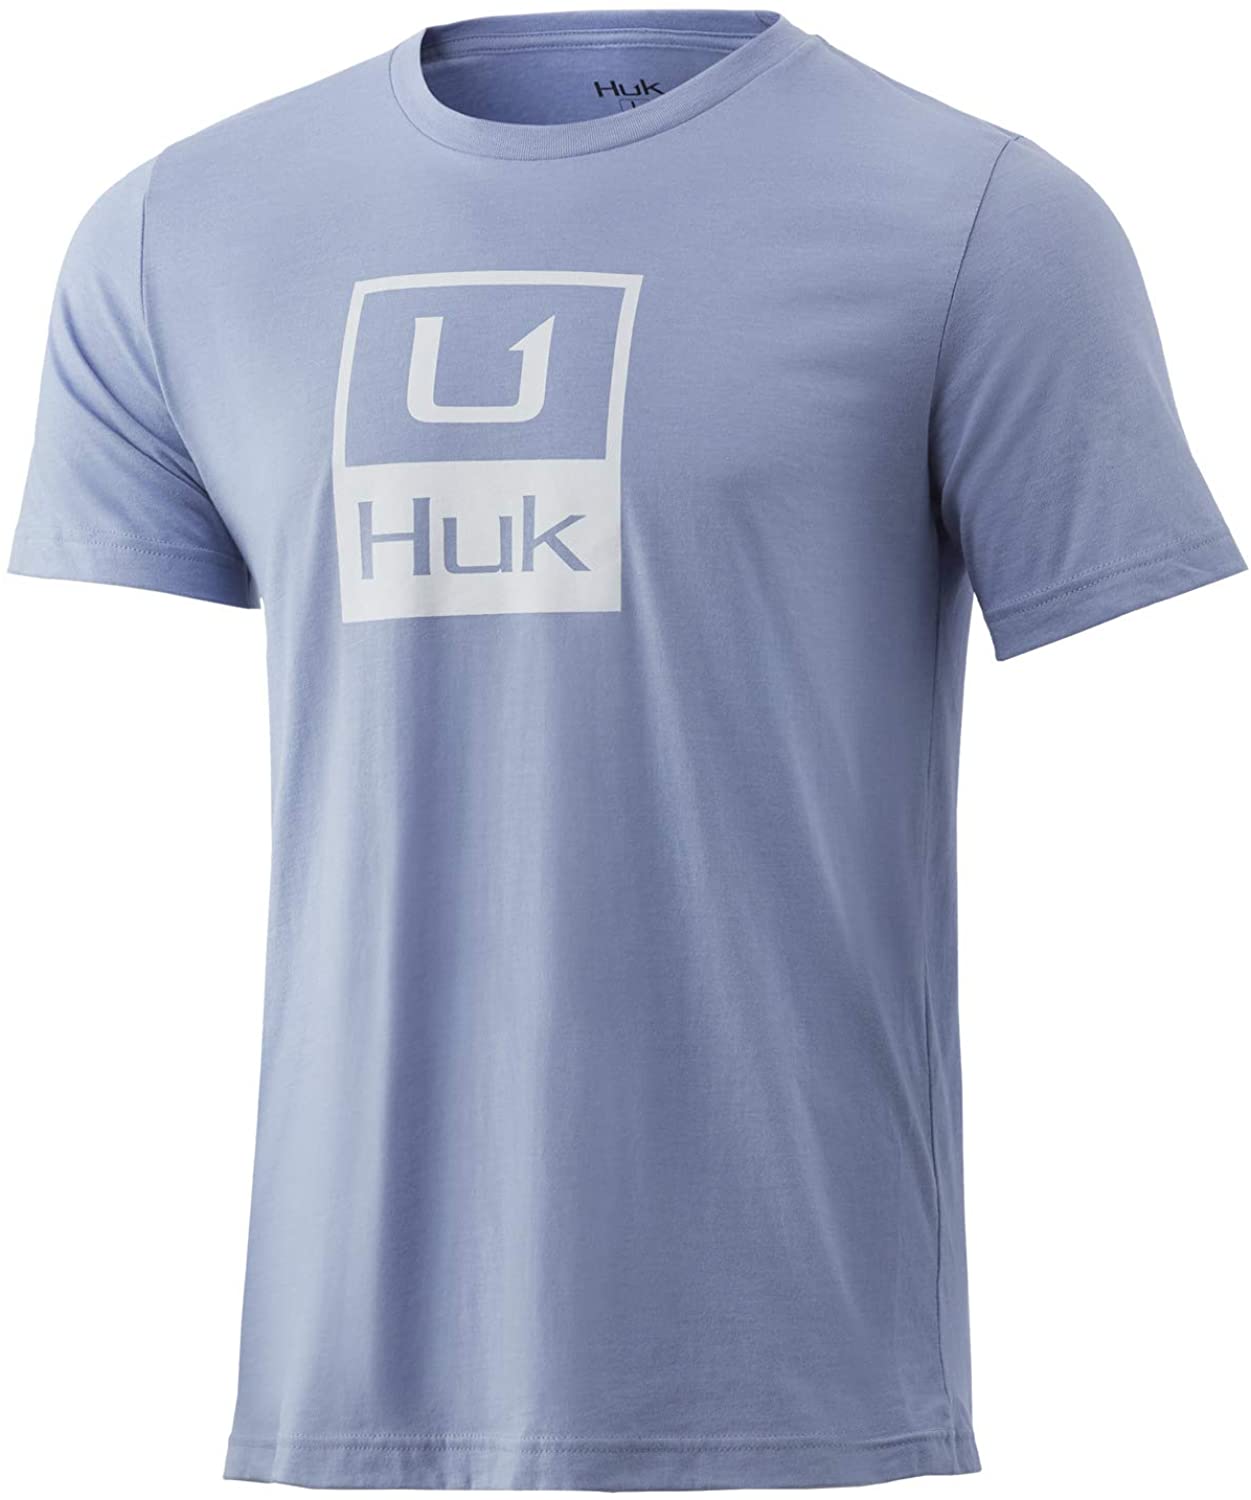 Men's Huk Huk'd Up Performance Tee in Dusk Blue Heather from the front